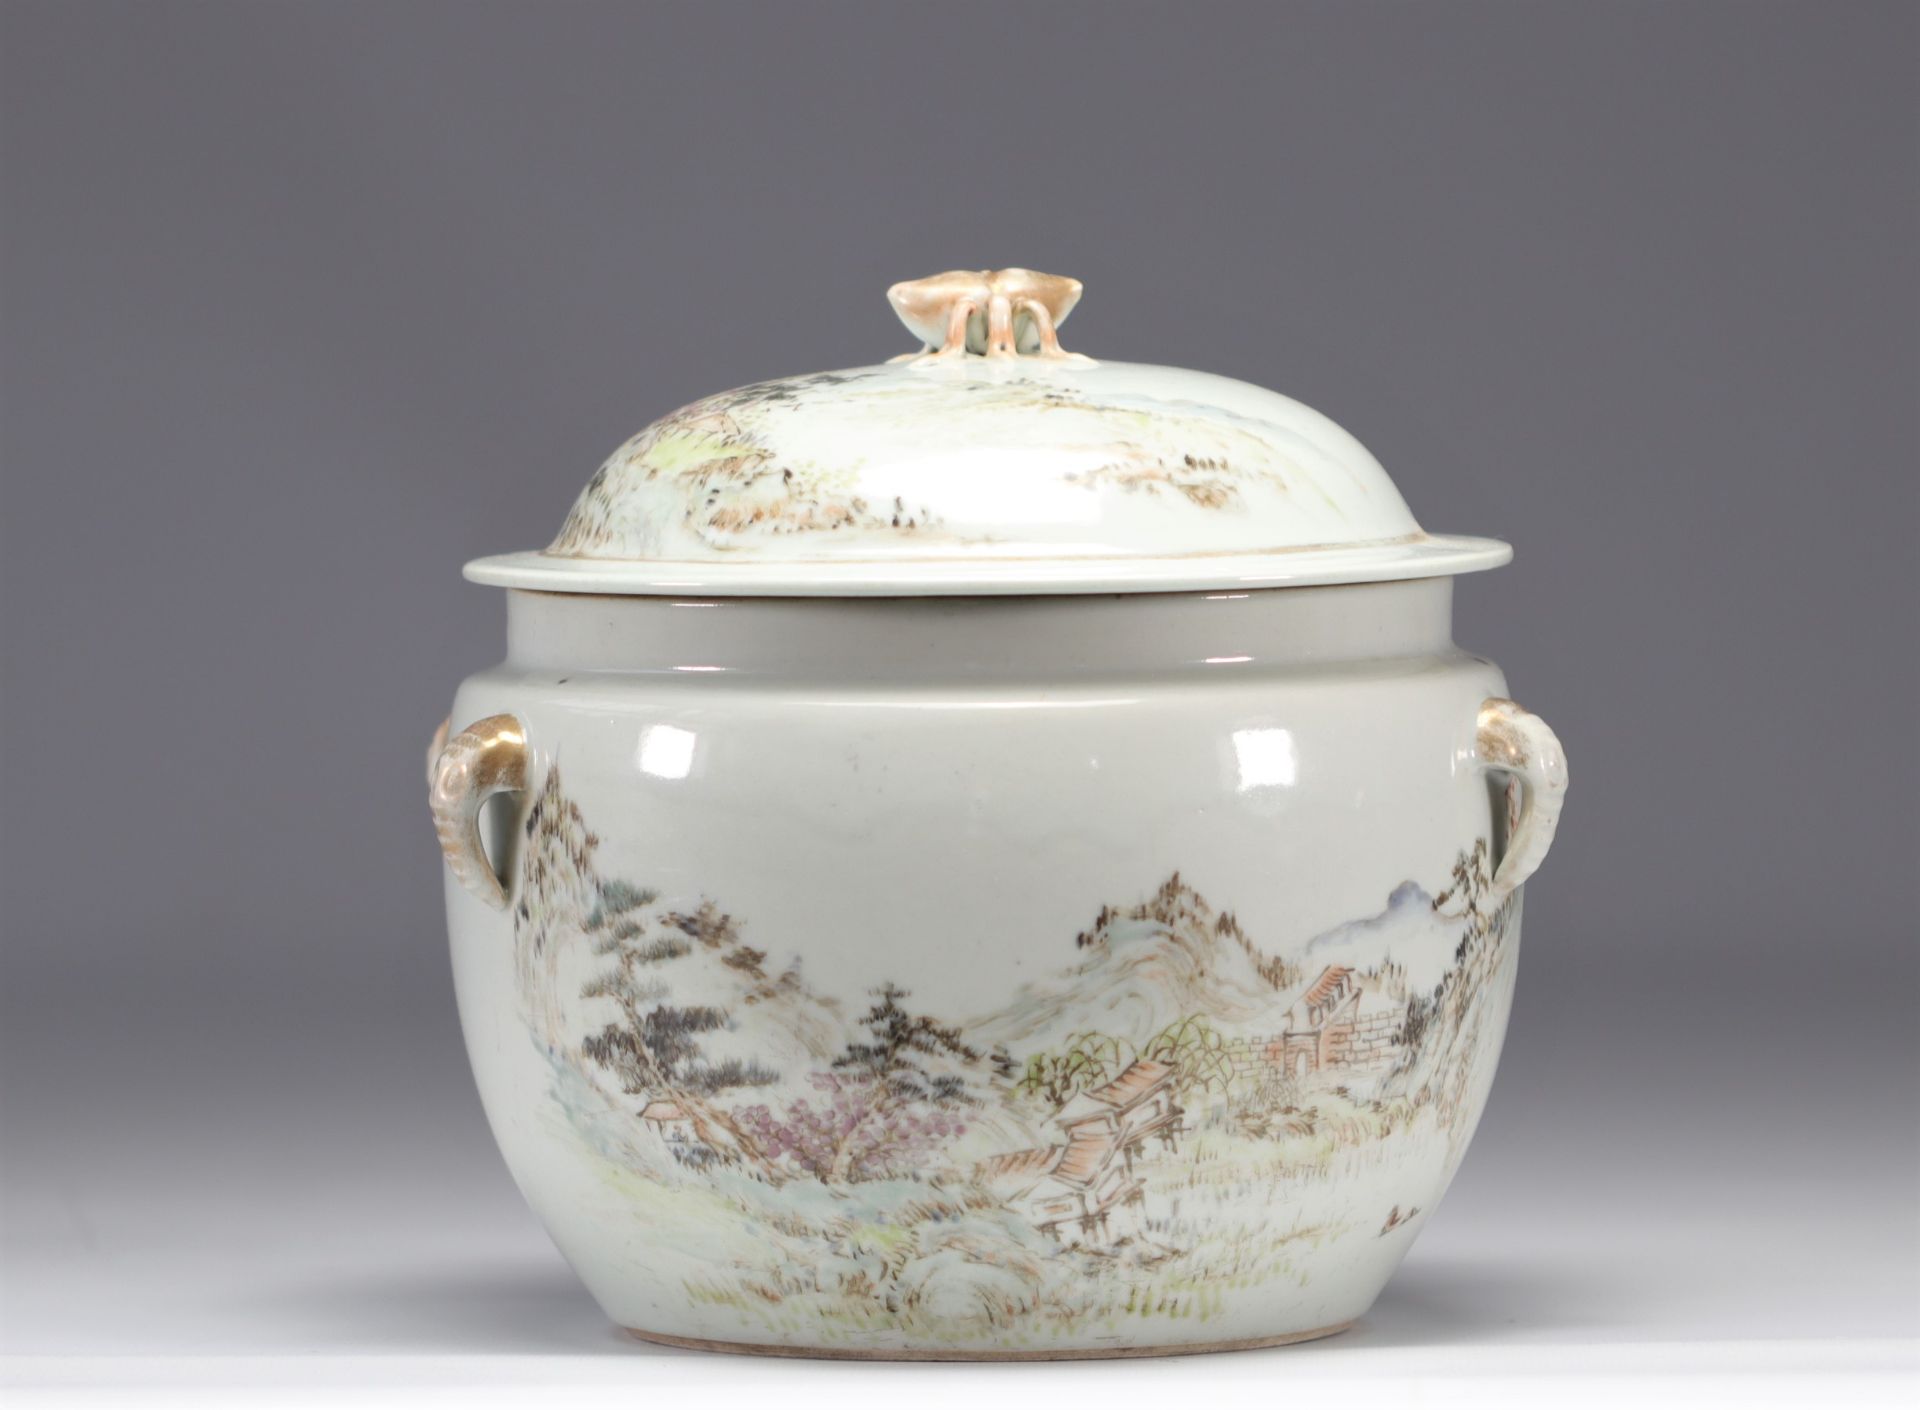 Covered Chinese porcelain tureen decorated with mountain landscapes